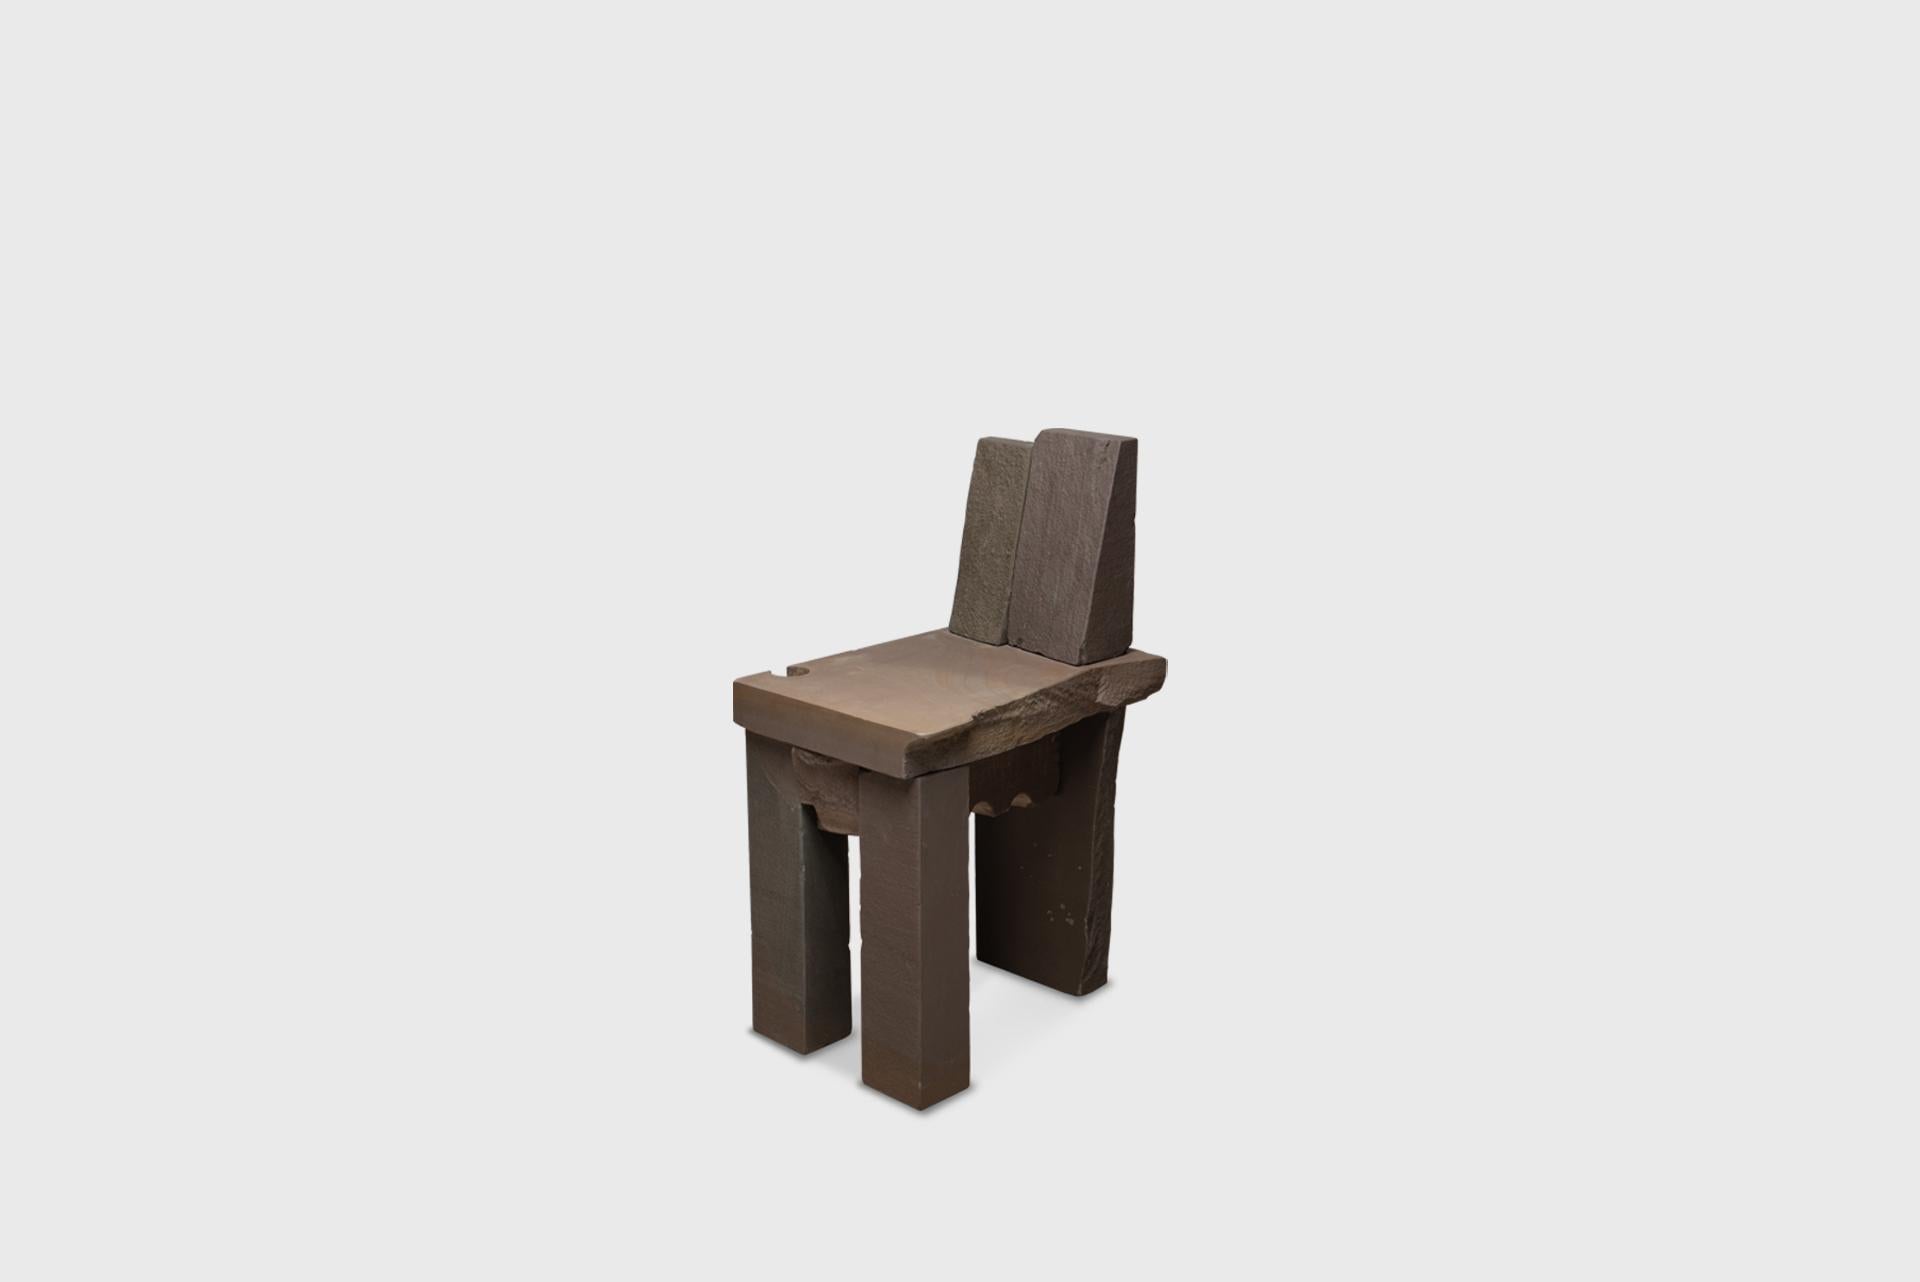 Contemporary Natural Chair 10, Graywacke Offcut Gray Stone, Carsten in der Elst For Sale 6